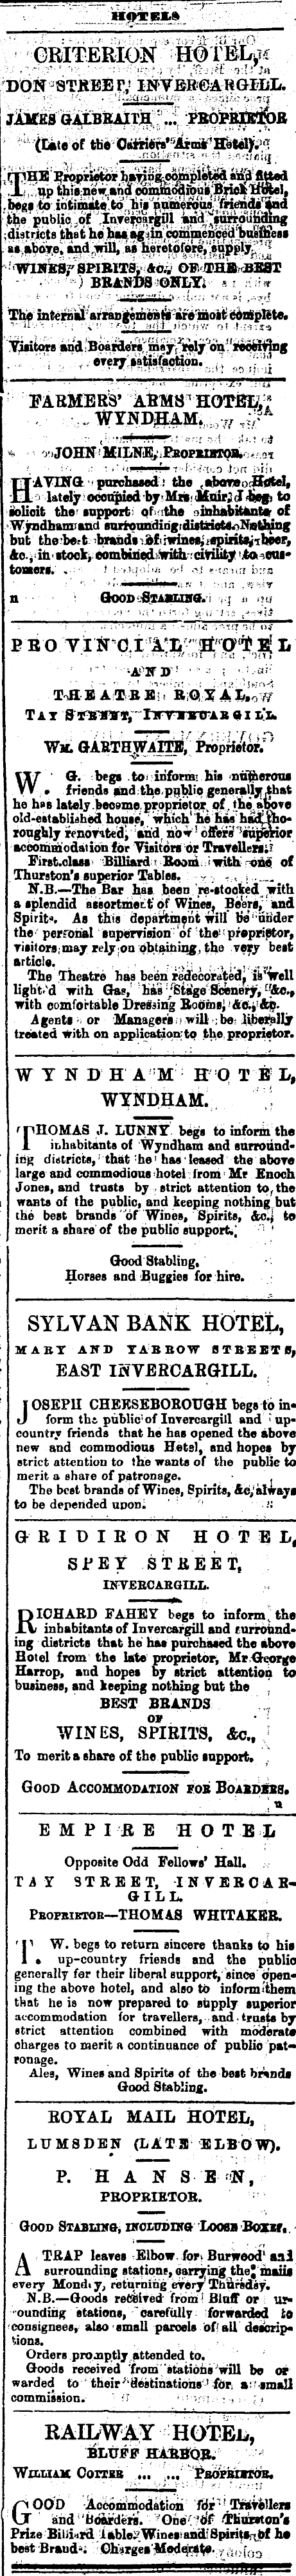 Papers Past Newspapers Southland Times 4 July 1878 Page 4 Advertisements Column 6